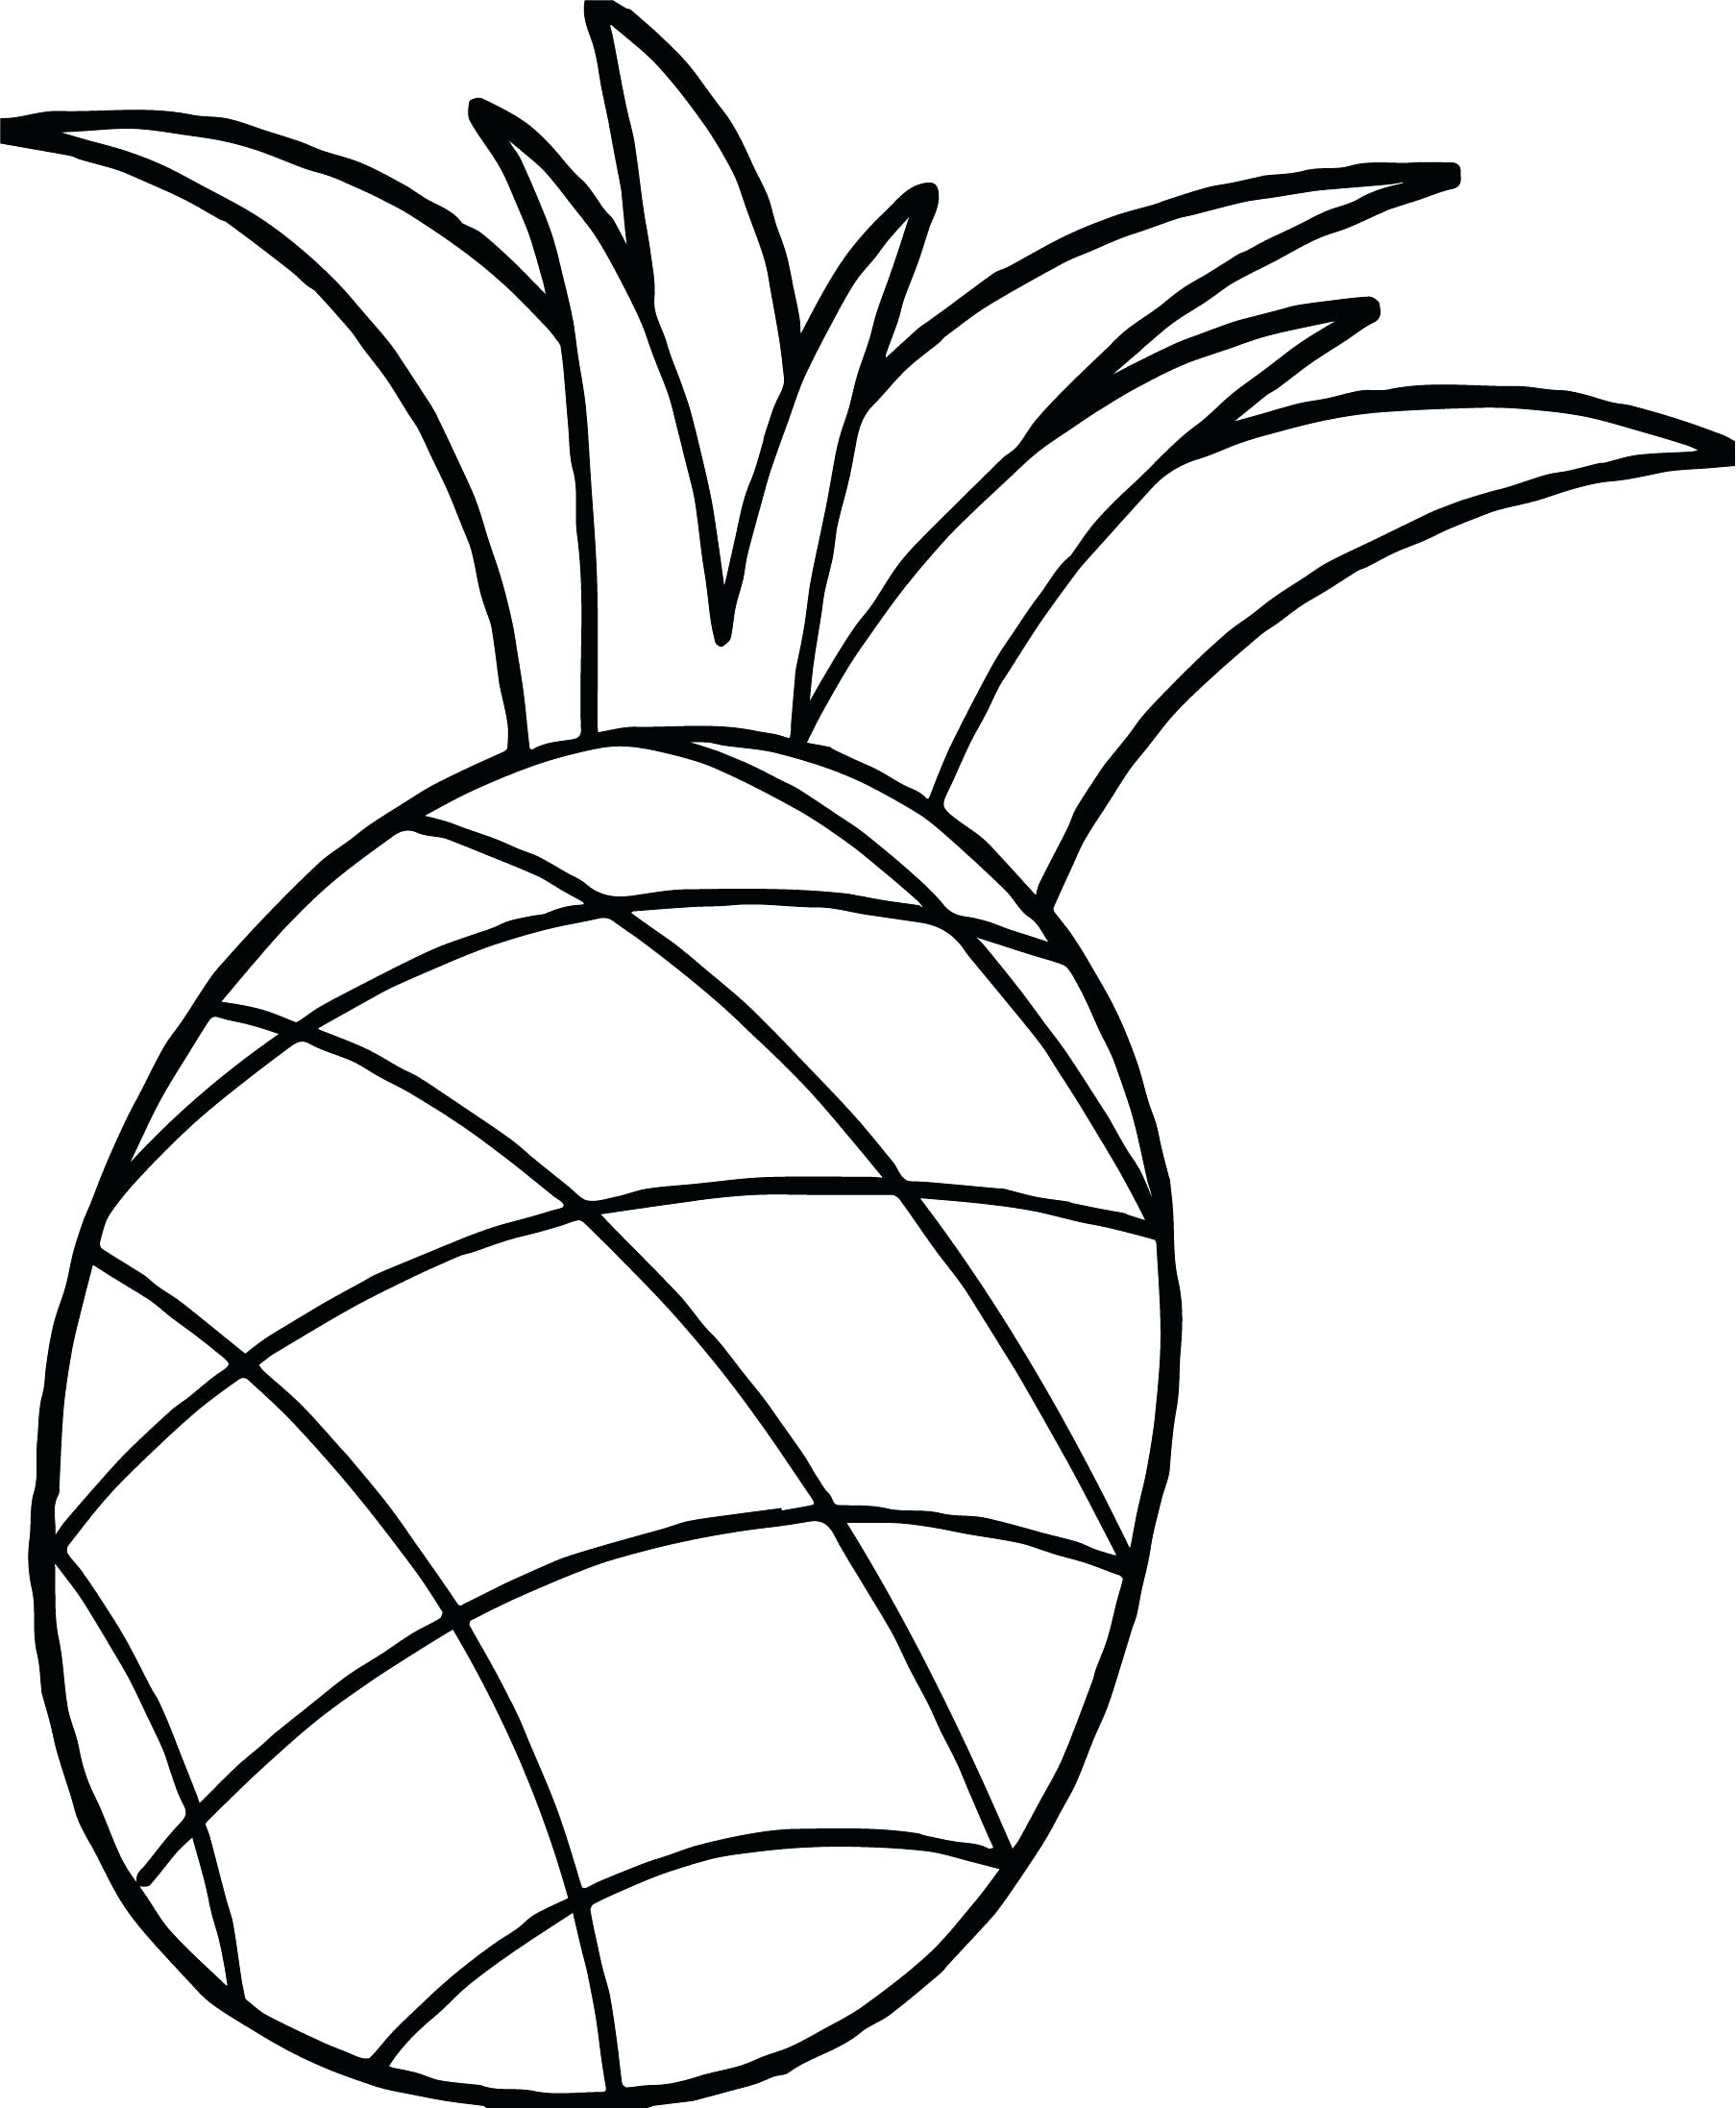 Download Clipart colouring pineapple pictures on Cliparts Pub 2020!